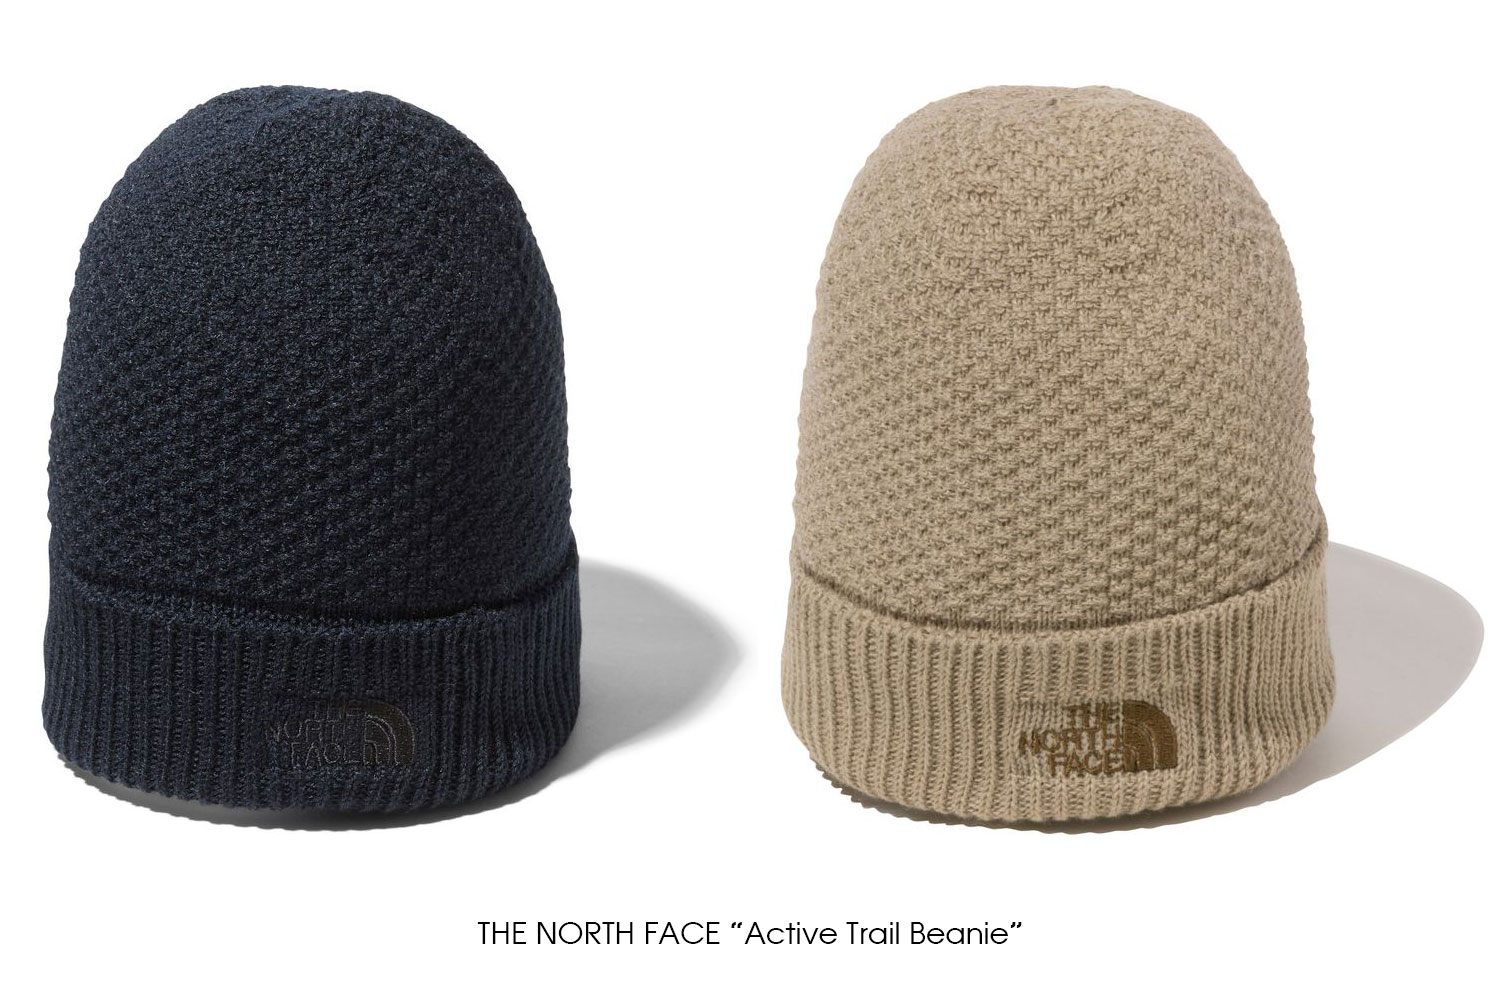 THE NORTH FACE "Active Trail Beanie"